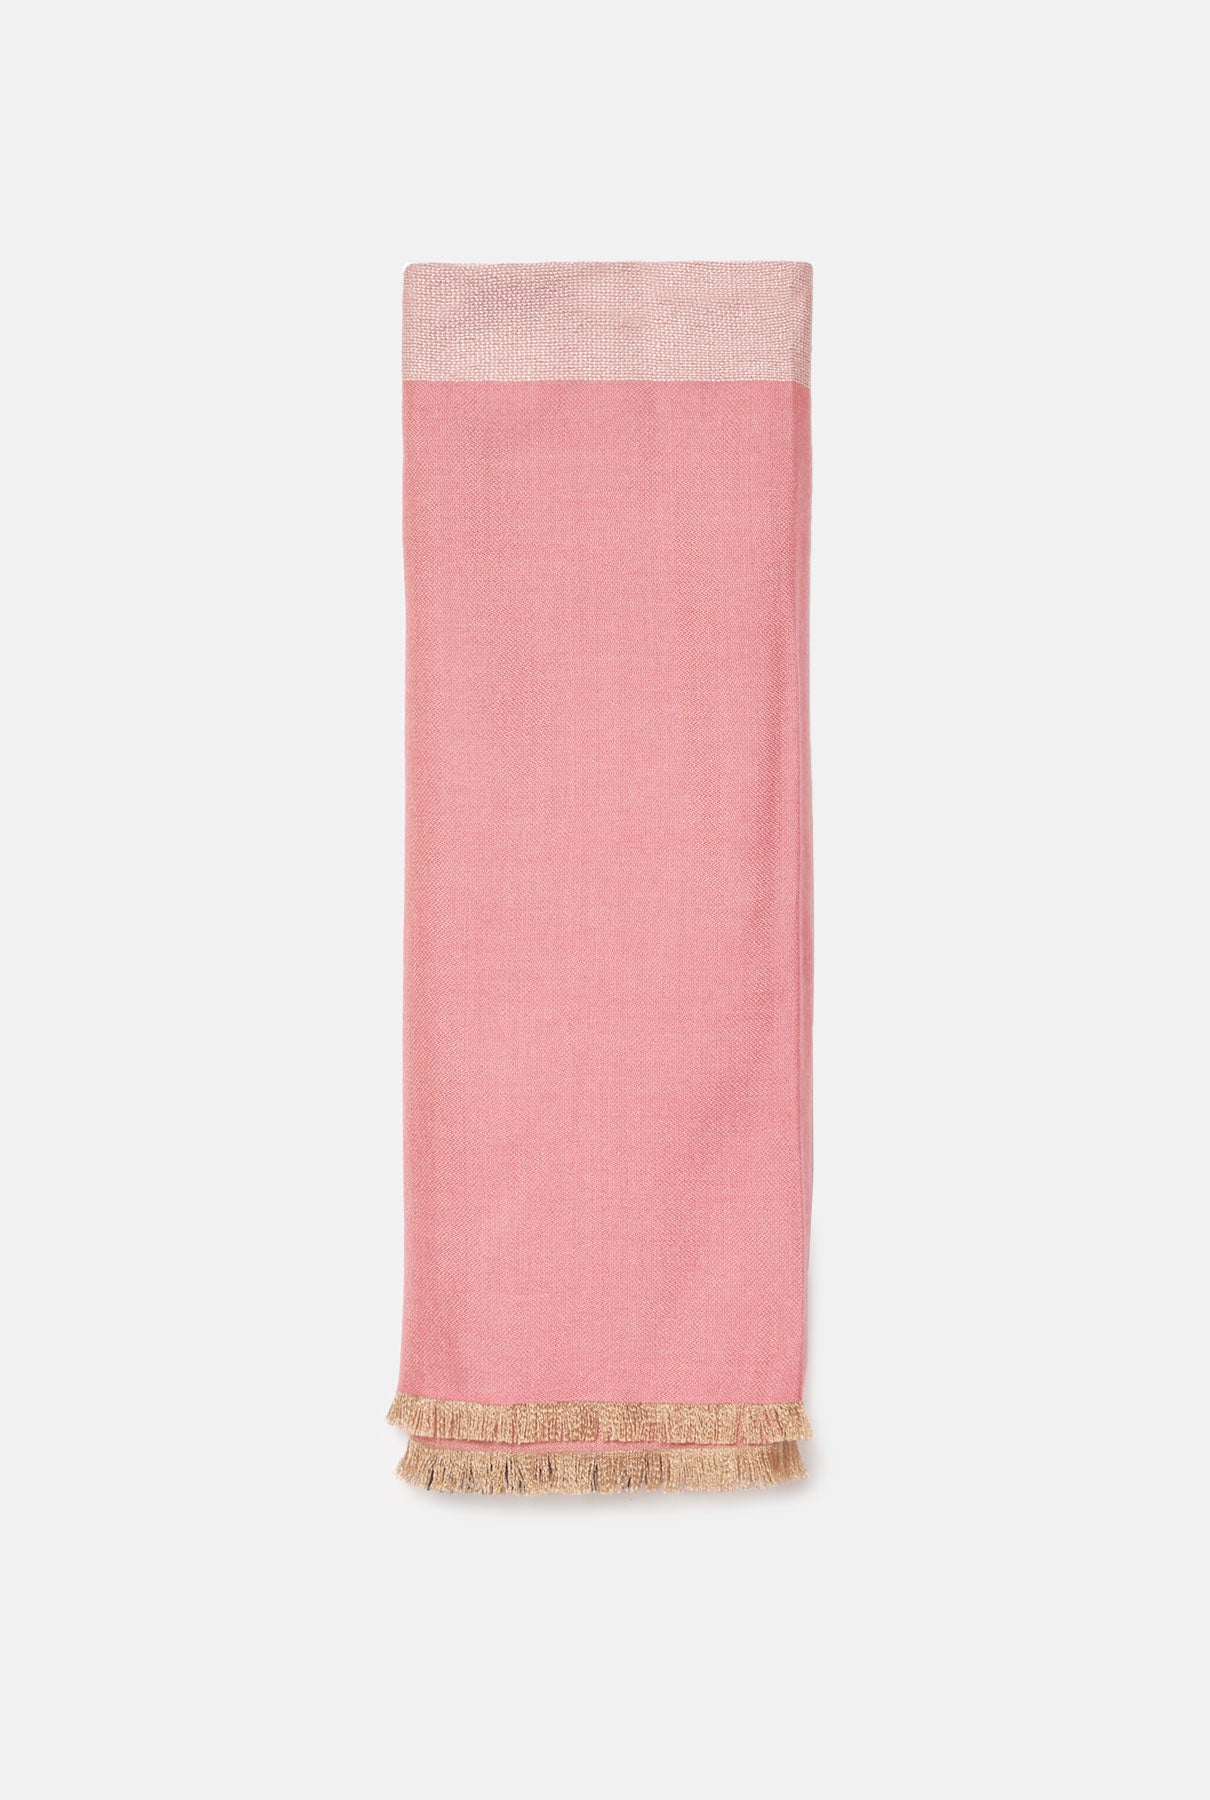 Cashmere and Silk Shawl in pink with sequins scarve Victoria de Talhora 